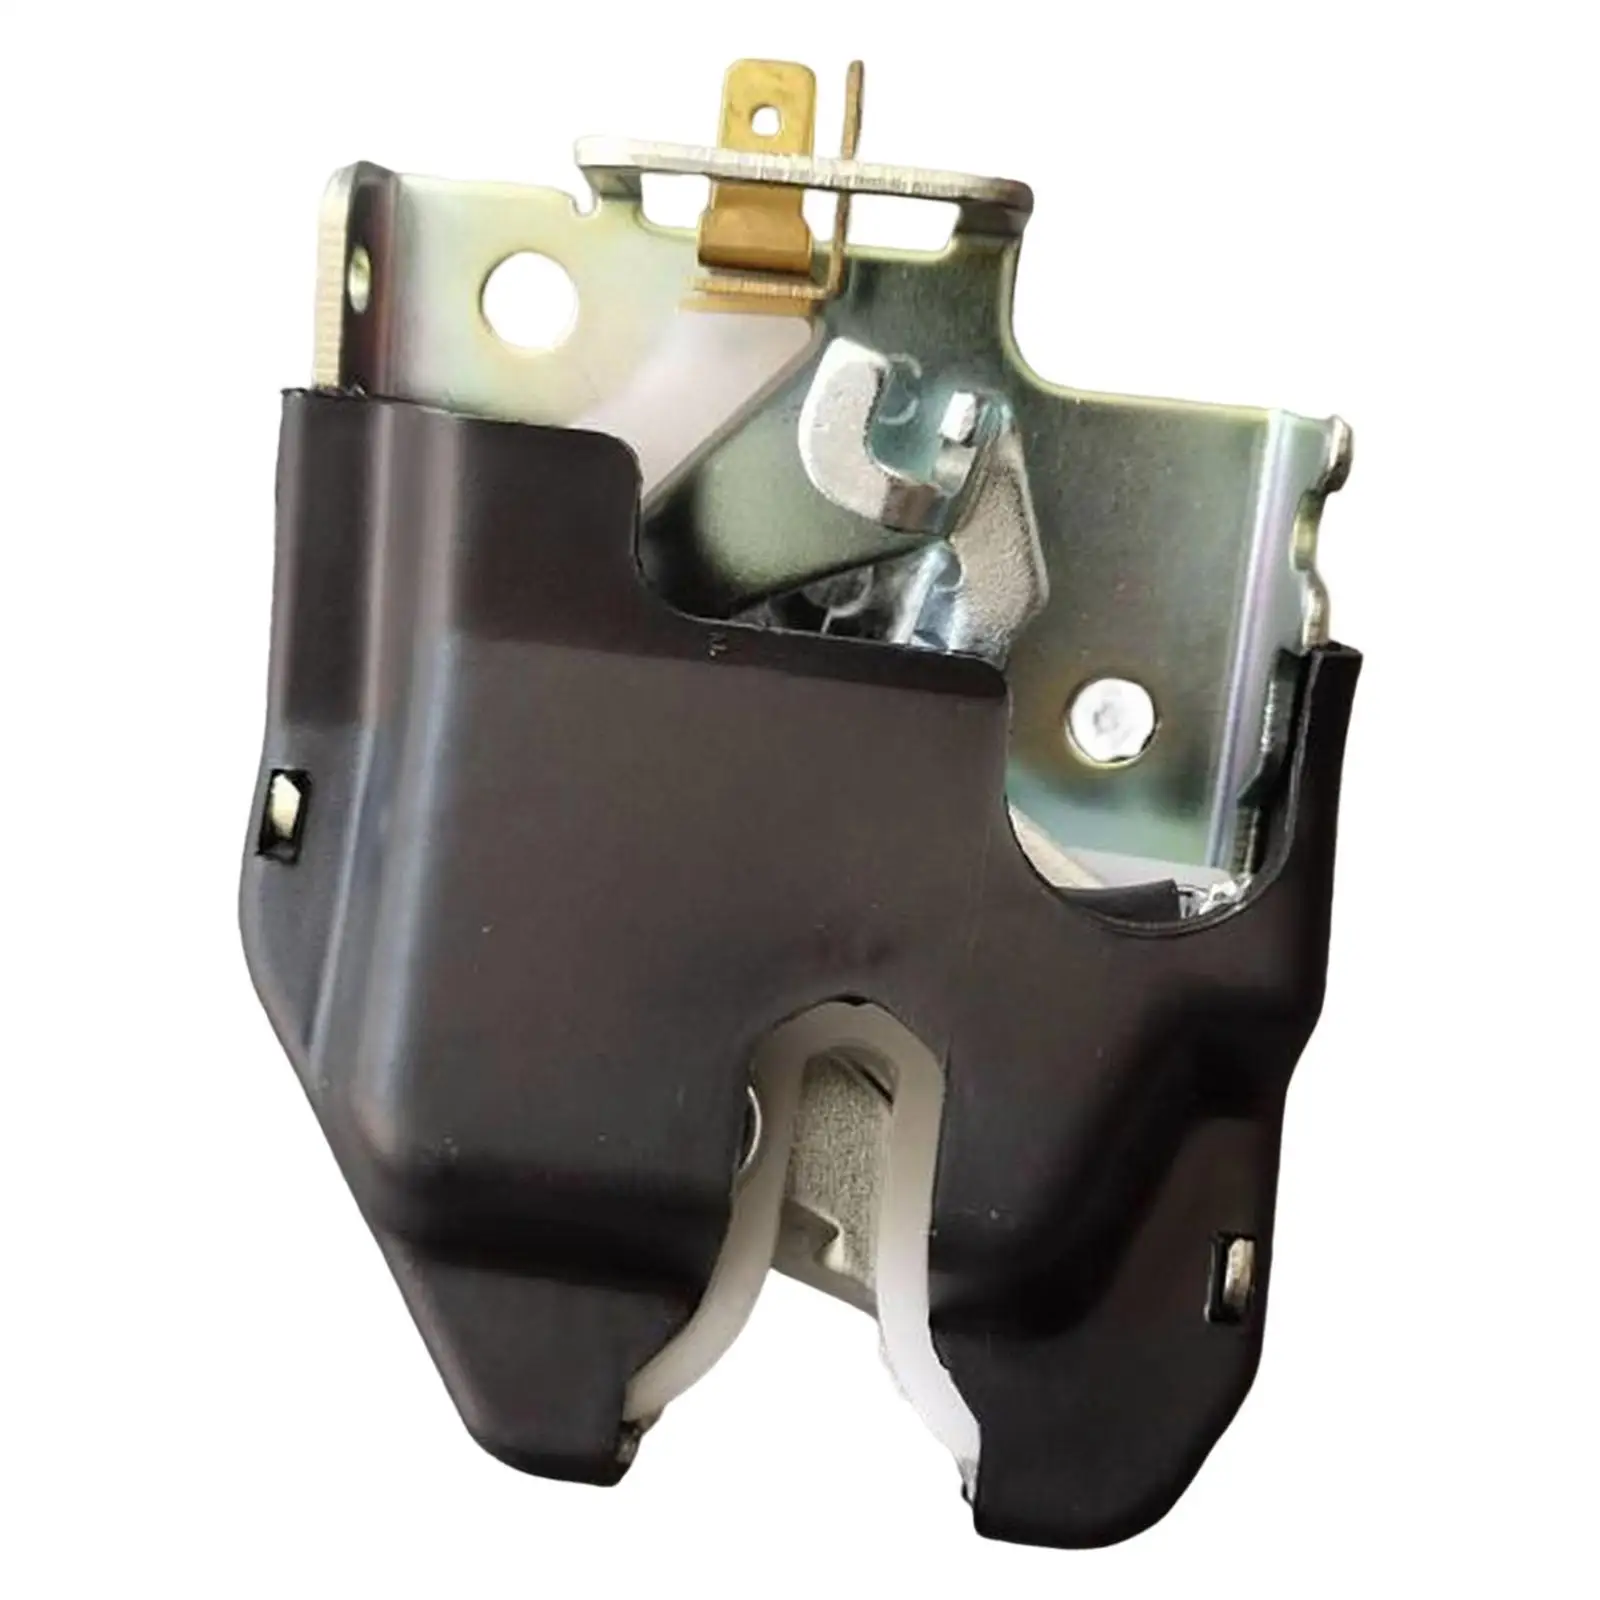 Tailgate Rear Door Latch Lock Car Accessories Replacement Hardware for , Direct replacement for the old or broken.